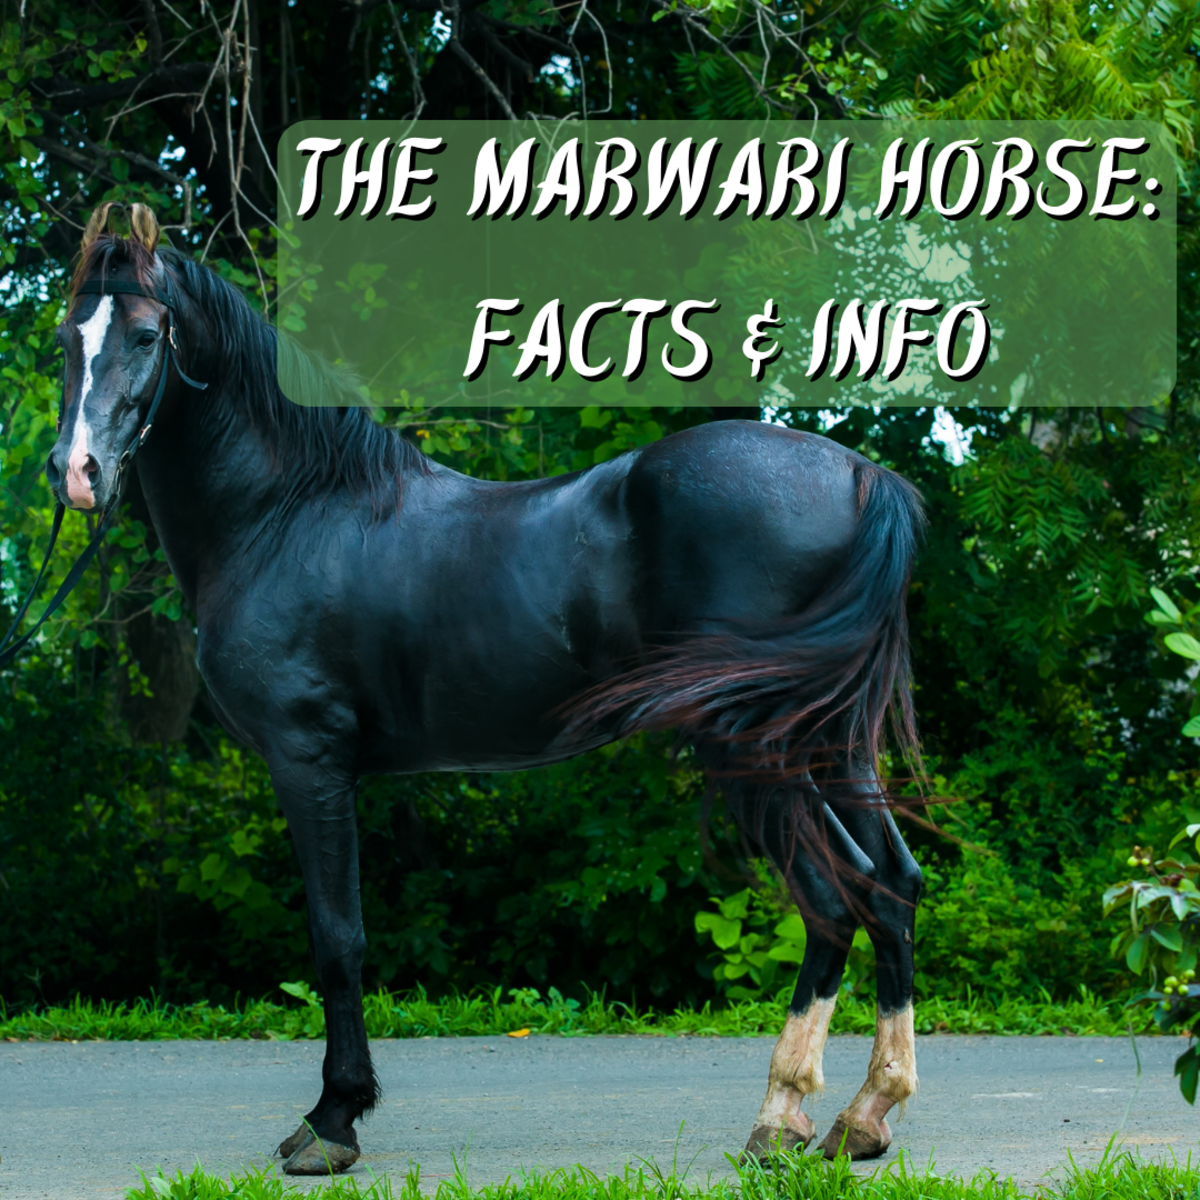 Everything About the Marwari, the Native Horse of India